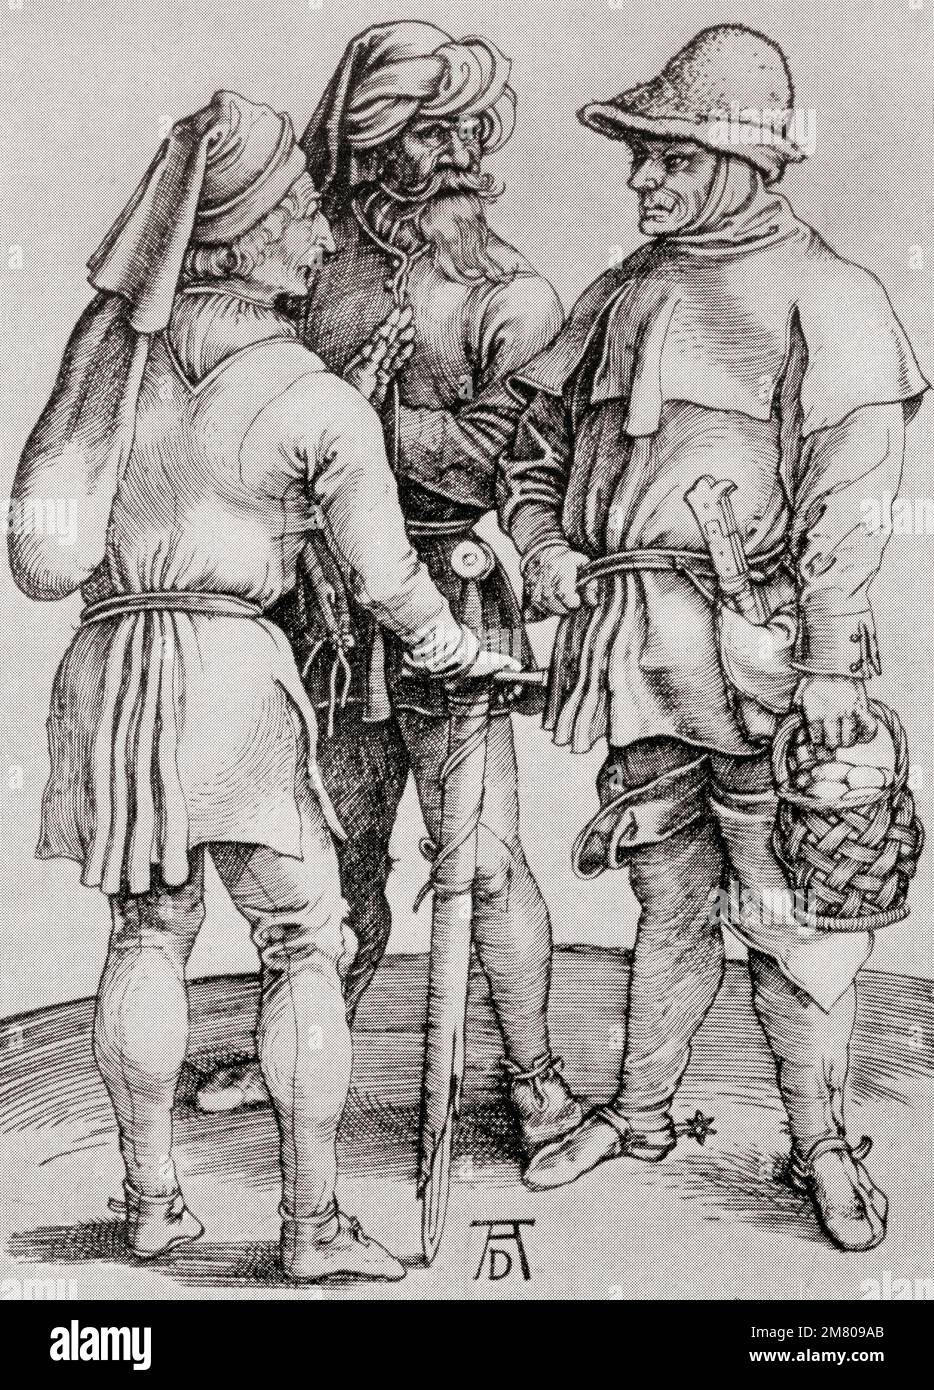 Three Peasants in Conversation, after the work by Albrecht Dürer, 1471 – 1528, sometimes spelled in English as Durer. German painter, printmaker, and theorist of the German Renaissance. From Albrecht Dürer, Sein Leben und eine Auswahl seiner Werke or His life and a selection of his works, published 1928. Stock Photo